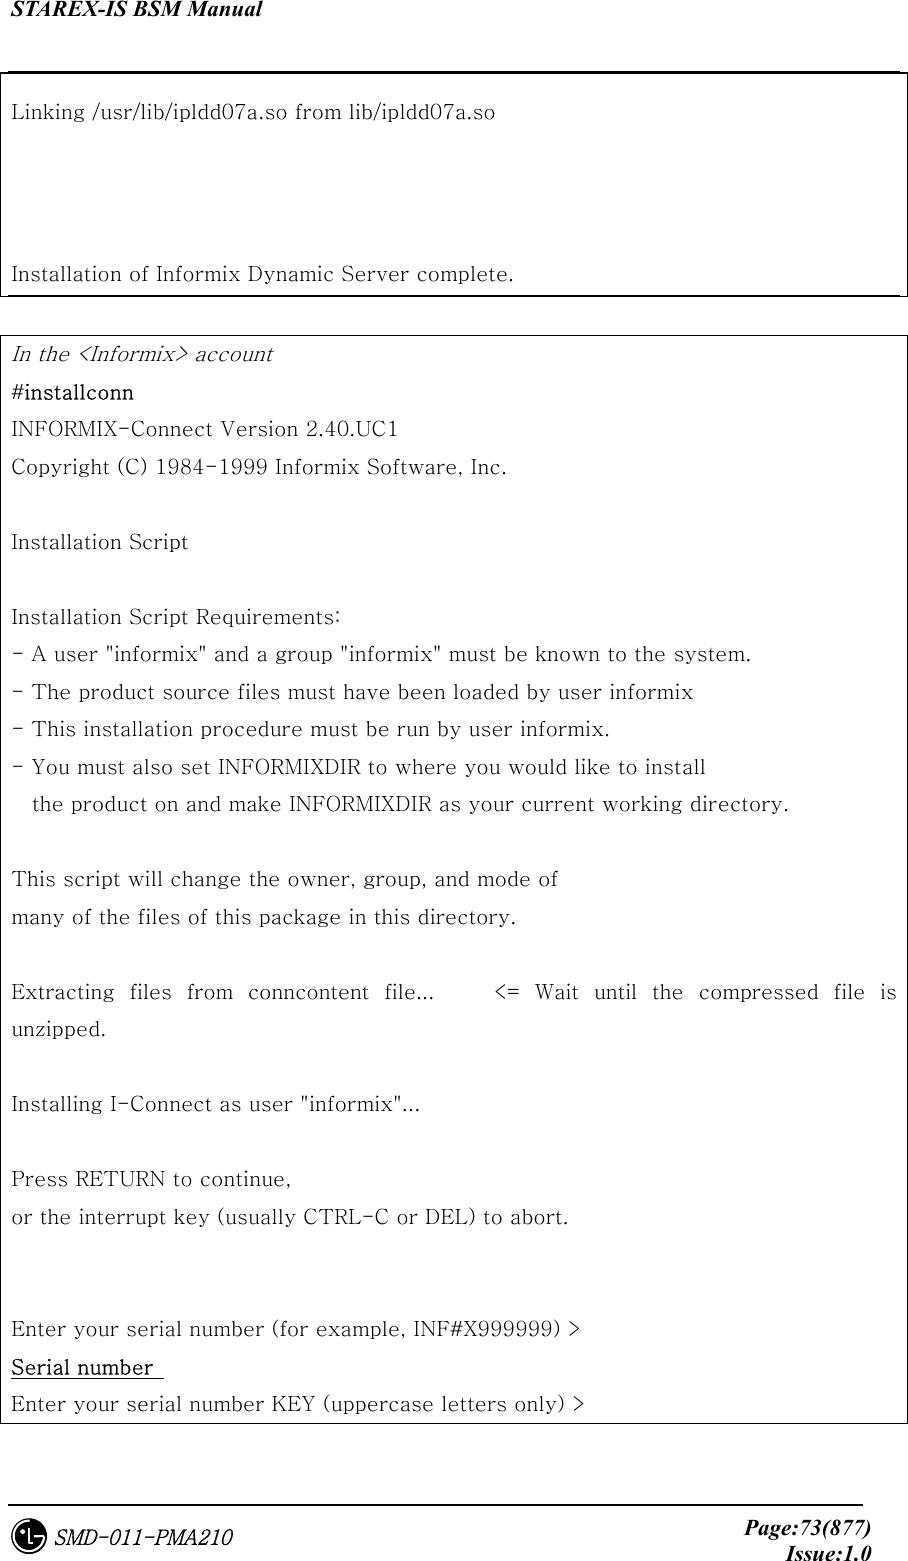 STAREX-IS BSM Manual     Page:73(877)Issue:1.0SMD-011-PMA210 Linking /usr/lib/ipldd07a.so from lib/ipldd07a.so   Installation of Informix Dynamic Server complete.  In the &lt;Informix&gt; account #installconn INFORMIX-Connect Version 2.40.UC1 Copyright (C) 1984-1999 Informix Software, Inc.  Installation Script   Installation Script Requirements: - A user &quot;informix&quot; and a group &quot;informix&quot; must be known to the system. - The product source files must have been loaded by user informix - This installation procedure must be run by user informix. - You must also set INFORMIXDIR to where you would like to install the product on and make INFORMIXDIR as your current working directory.   This script will change the owner, group, and mode of many of the files of this package in this directory.  Extracting files from conncontent file...    &lt;= Wait until the compressed  file  is unzipped.    Installing I-Connect as user &quot;informix&quot;...  Press RETURN to continue, or the interrupt key (usually CTRL-C or DEL) to abort.   Enter your serial number (for example, INF#X999999) &gt;   Serial number  Enter your serial number KEY (uppercase letters only) &gt;   